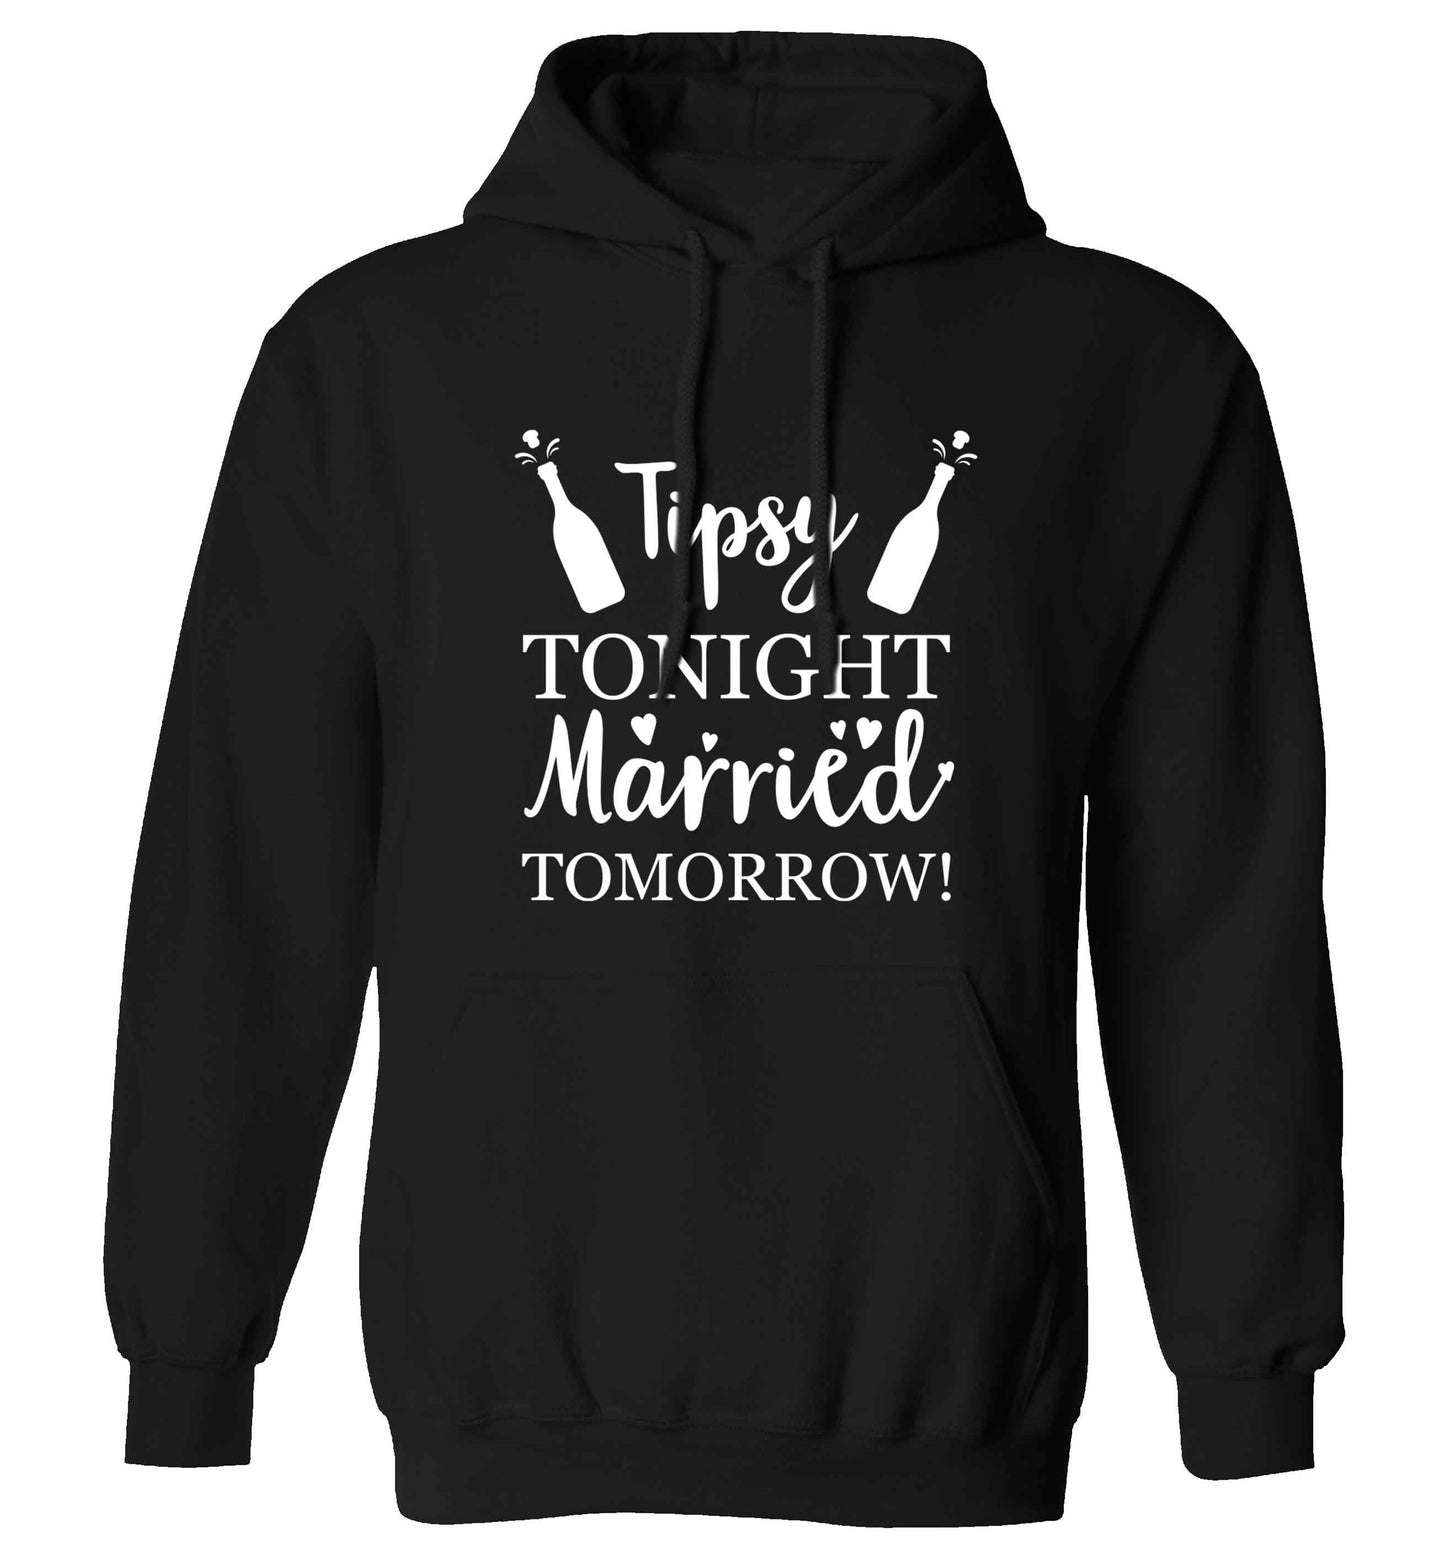 Personalised wedding thank you's Mr and Mrs wedding and date! Ideal wedding favours! adults unisex black hoodie 2XL